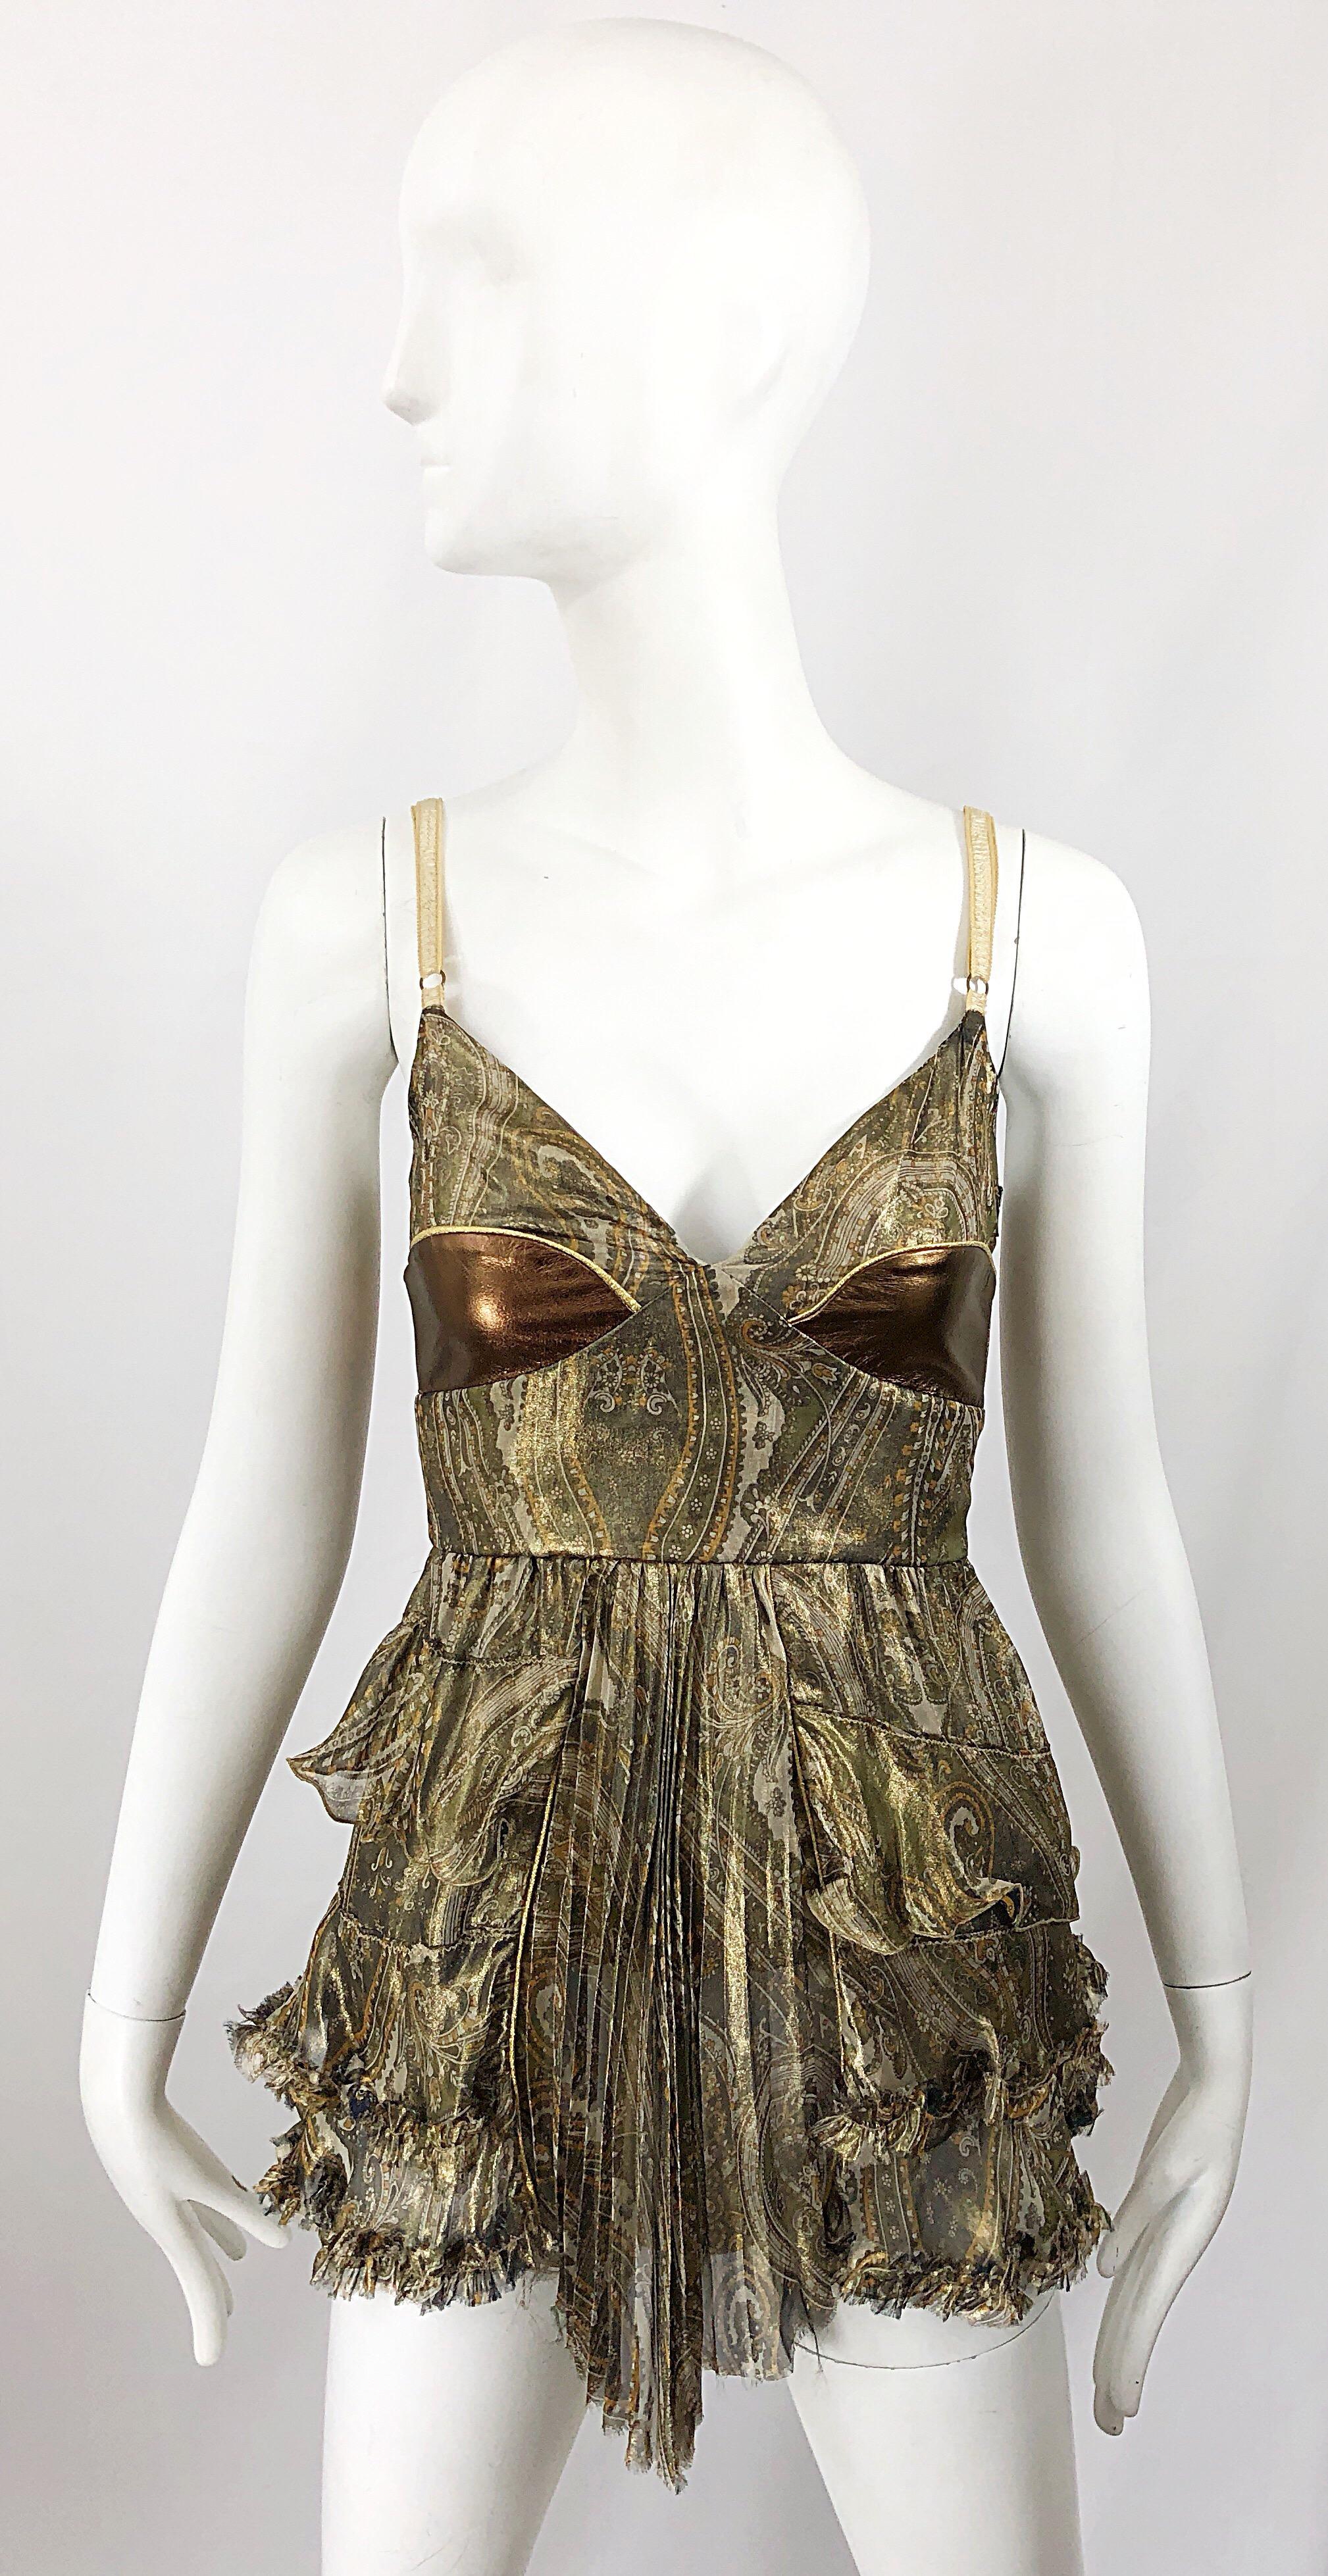 Sexy late 90s DOLCE & GABBANA silk and leather paisley metallic babydoll top! Features paisley prints in warm tones of greens and browns. Bronze leather metallic bronze panels at each breast. Ruffles and pleats throughout. Full metal zipper up the